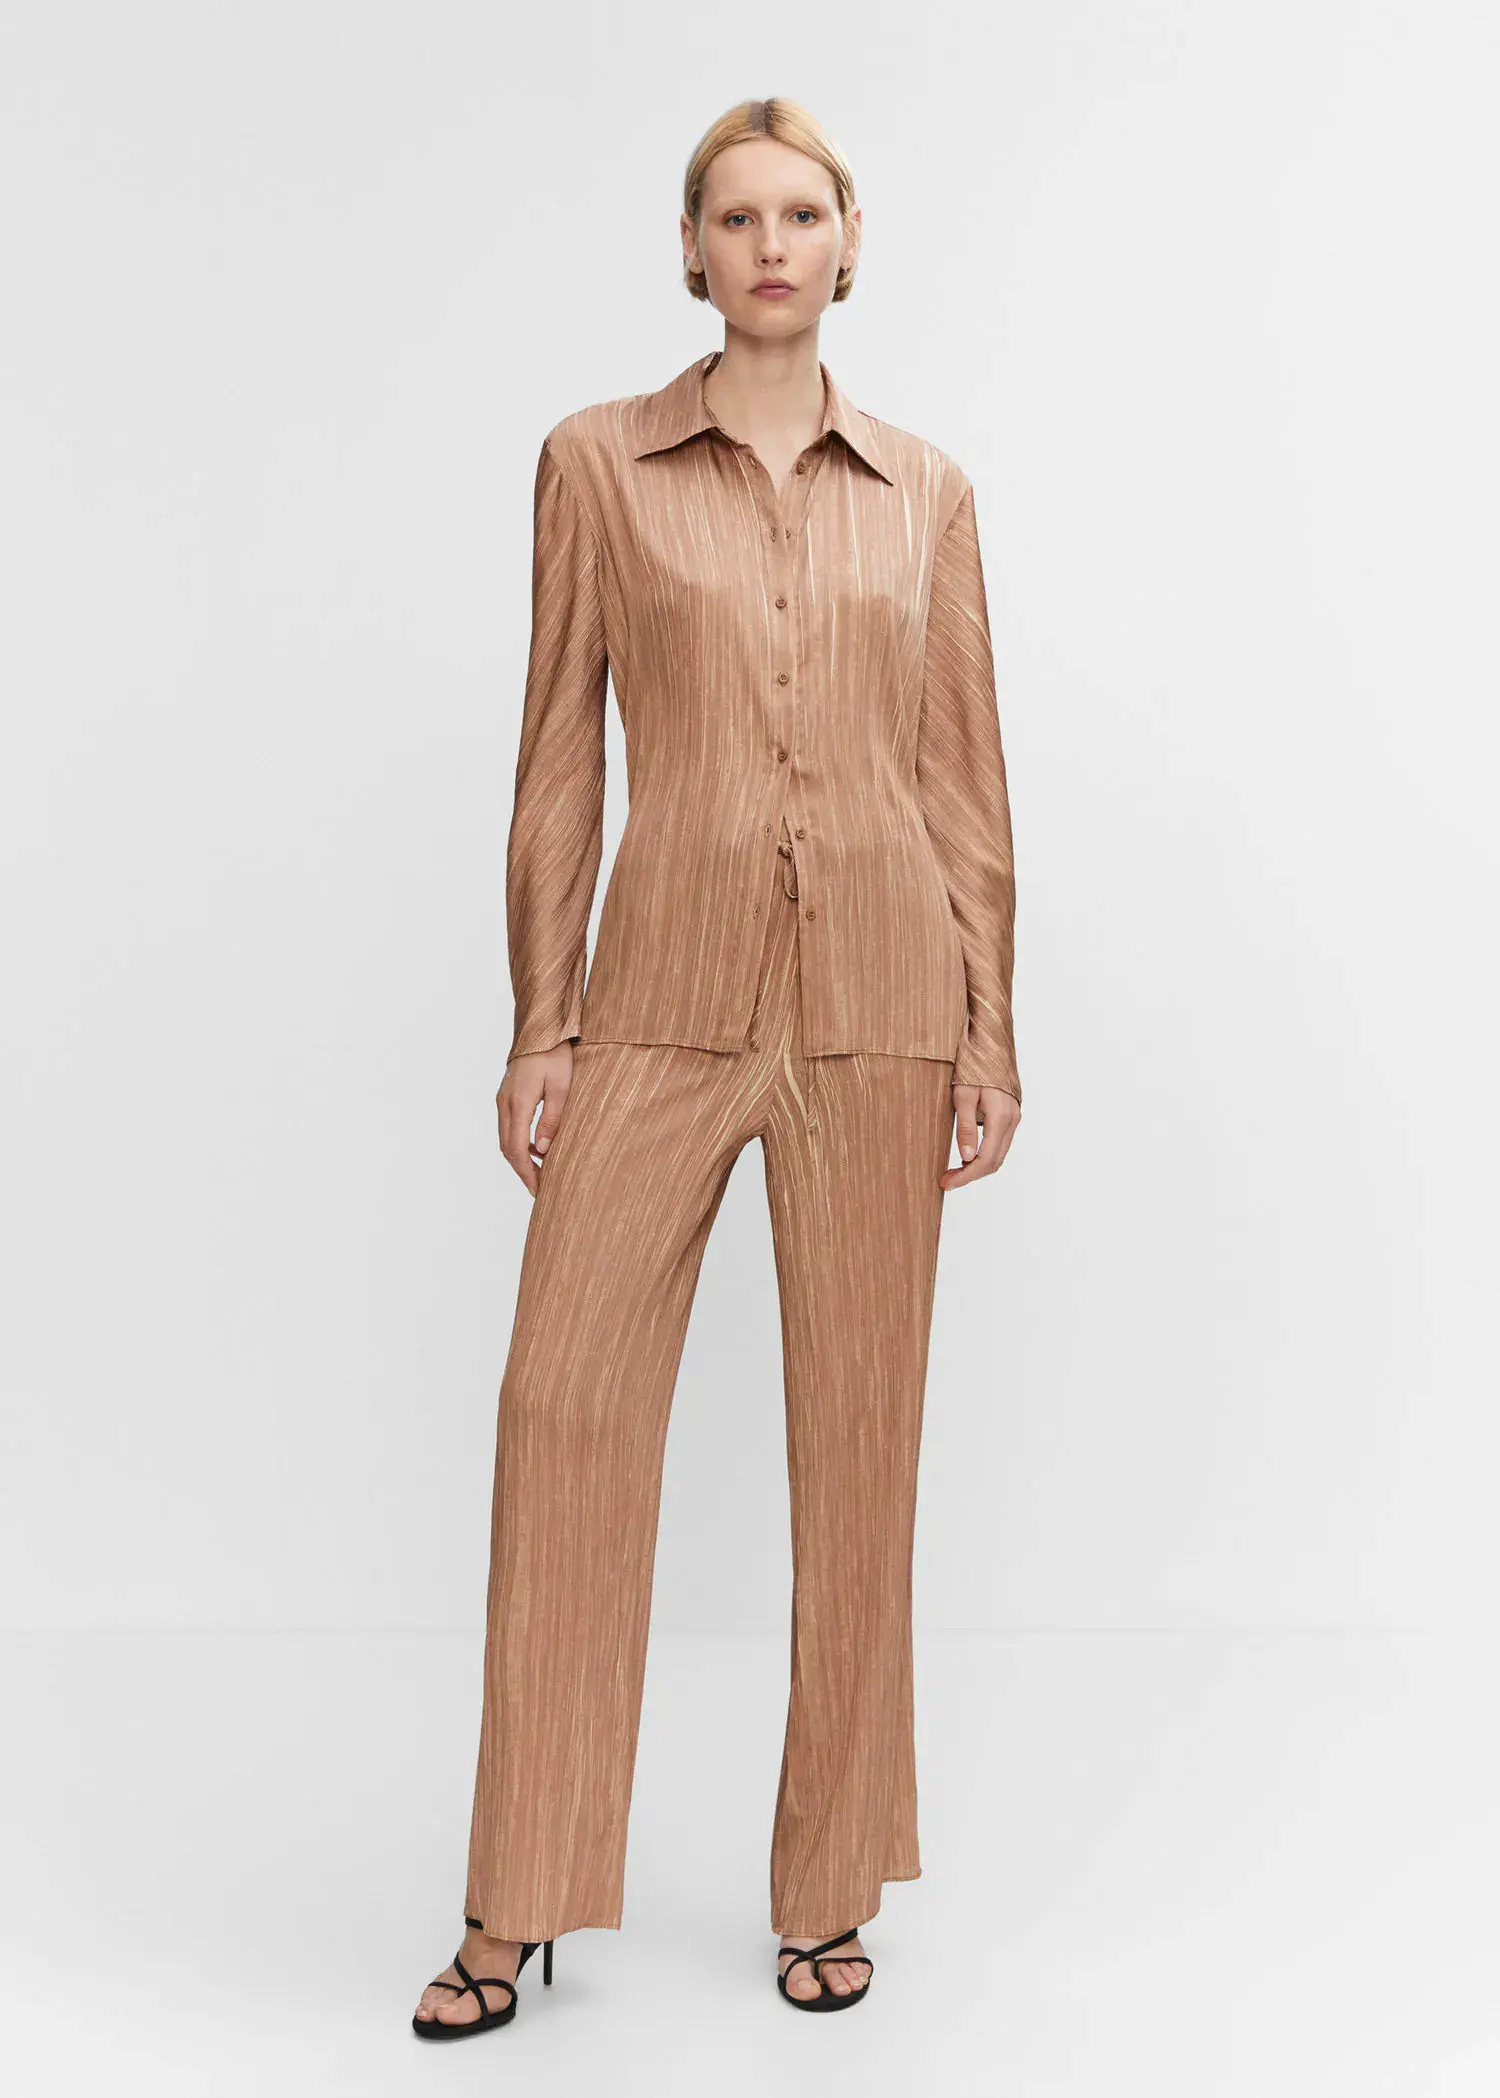 Mango Satin pleated shirt. a woman in a tan suit standing in front of a white wall. 